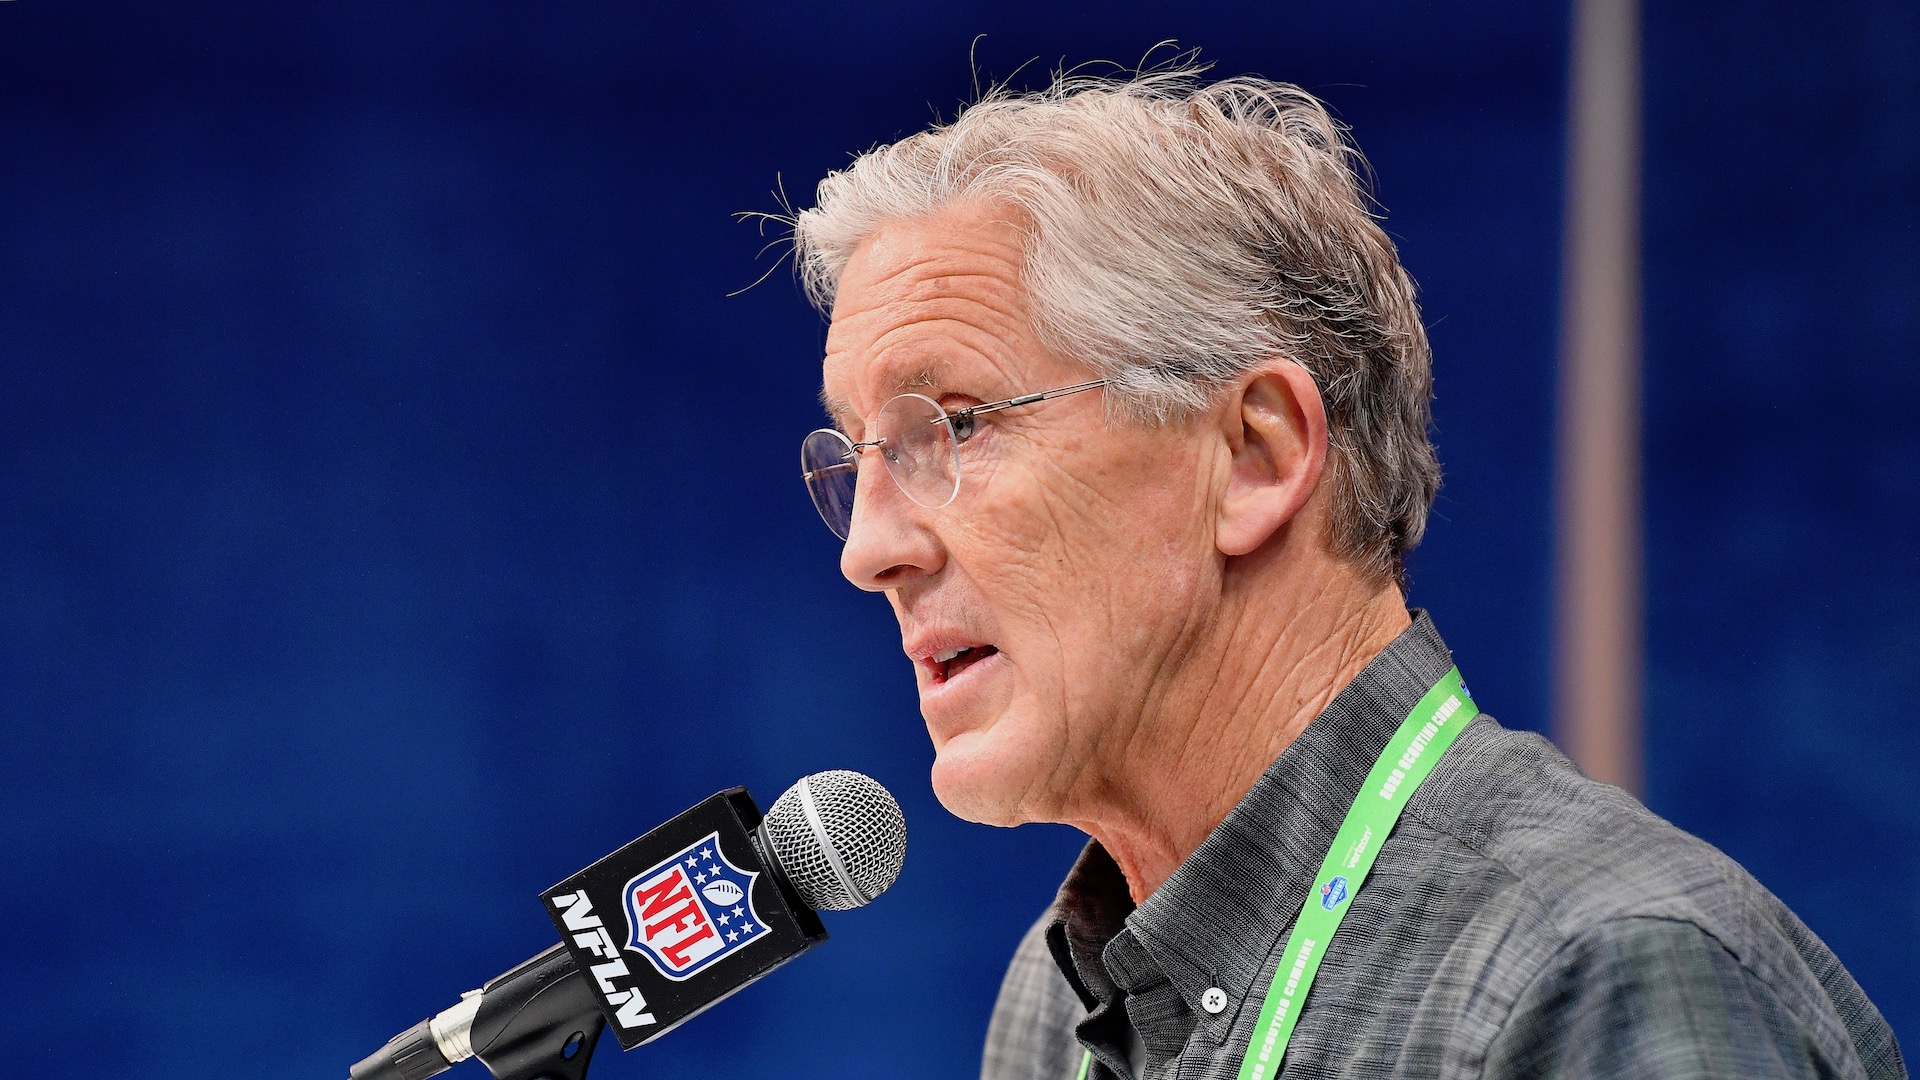 Seahawks Cancel Practice, Pete Carroll Delivers Speech on Racial Equality and Unity